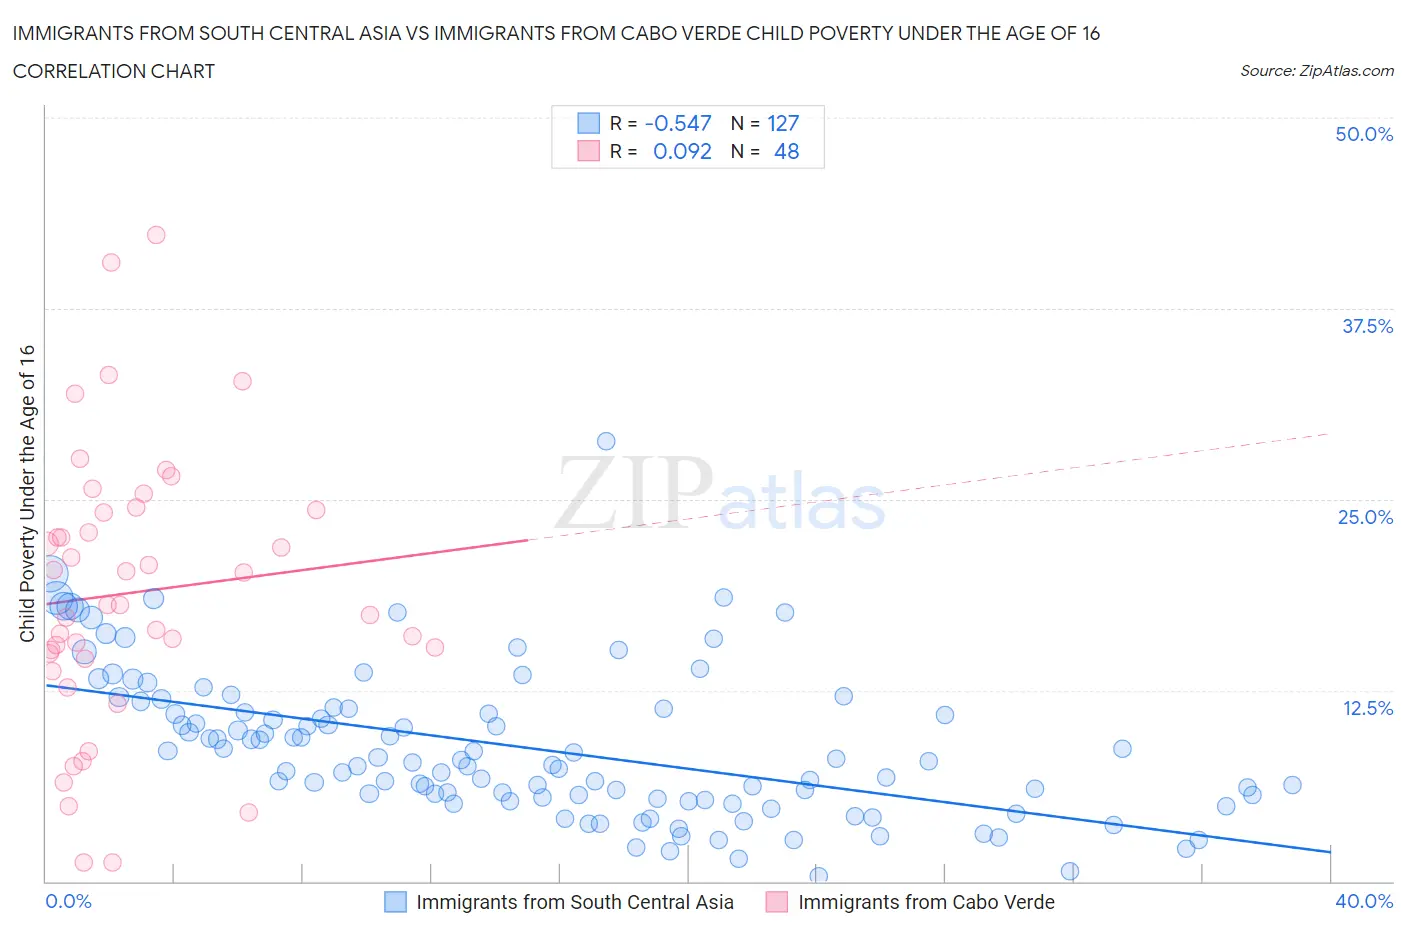 Immigrants from South Central Asia vs Immigrants from Cabo Verde Child Poverty Under the Age of 16